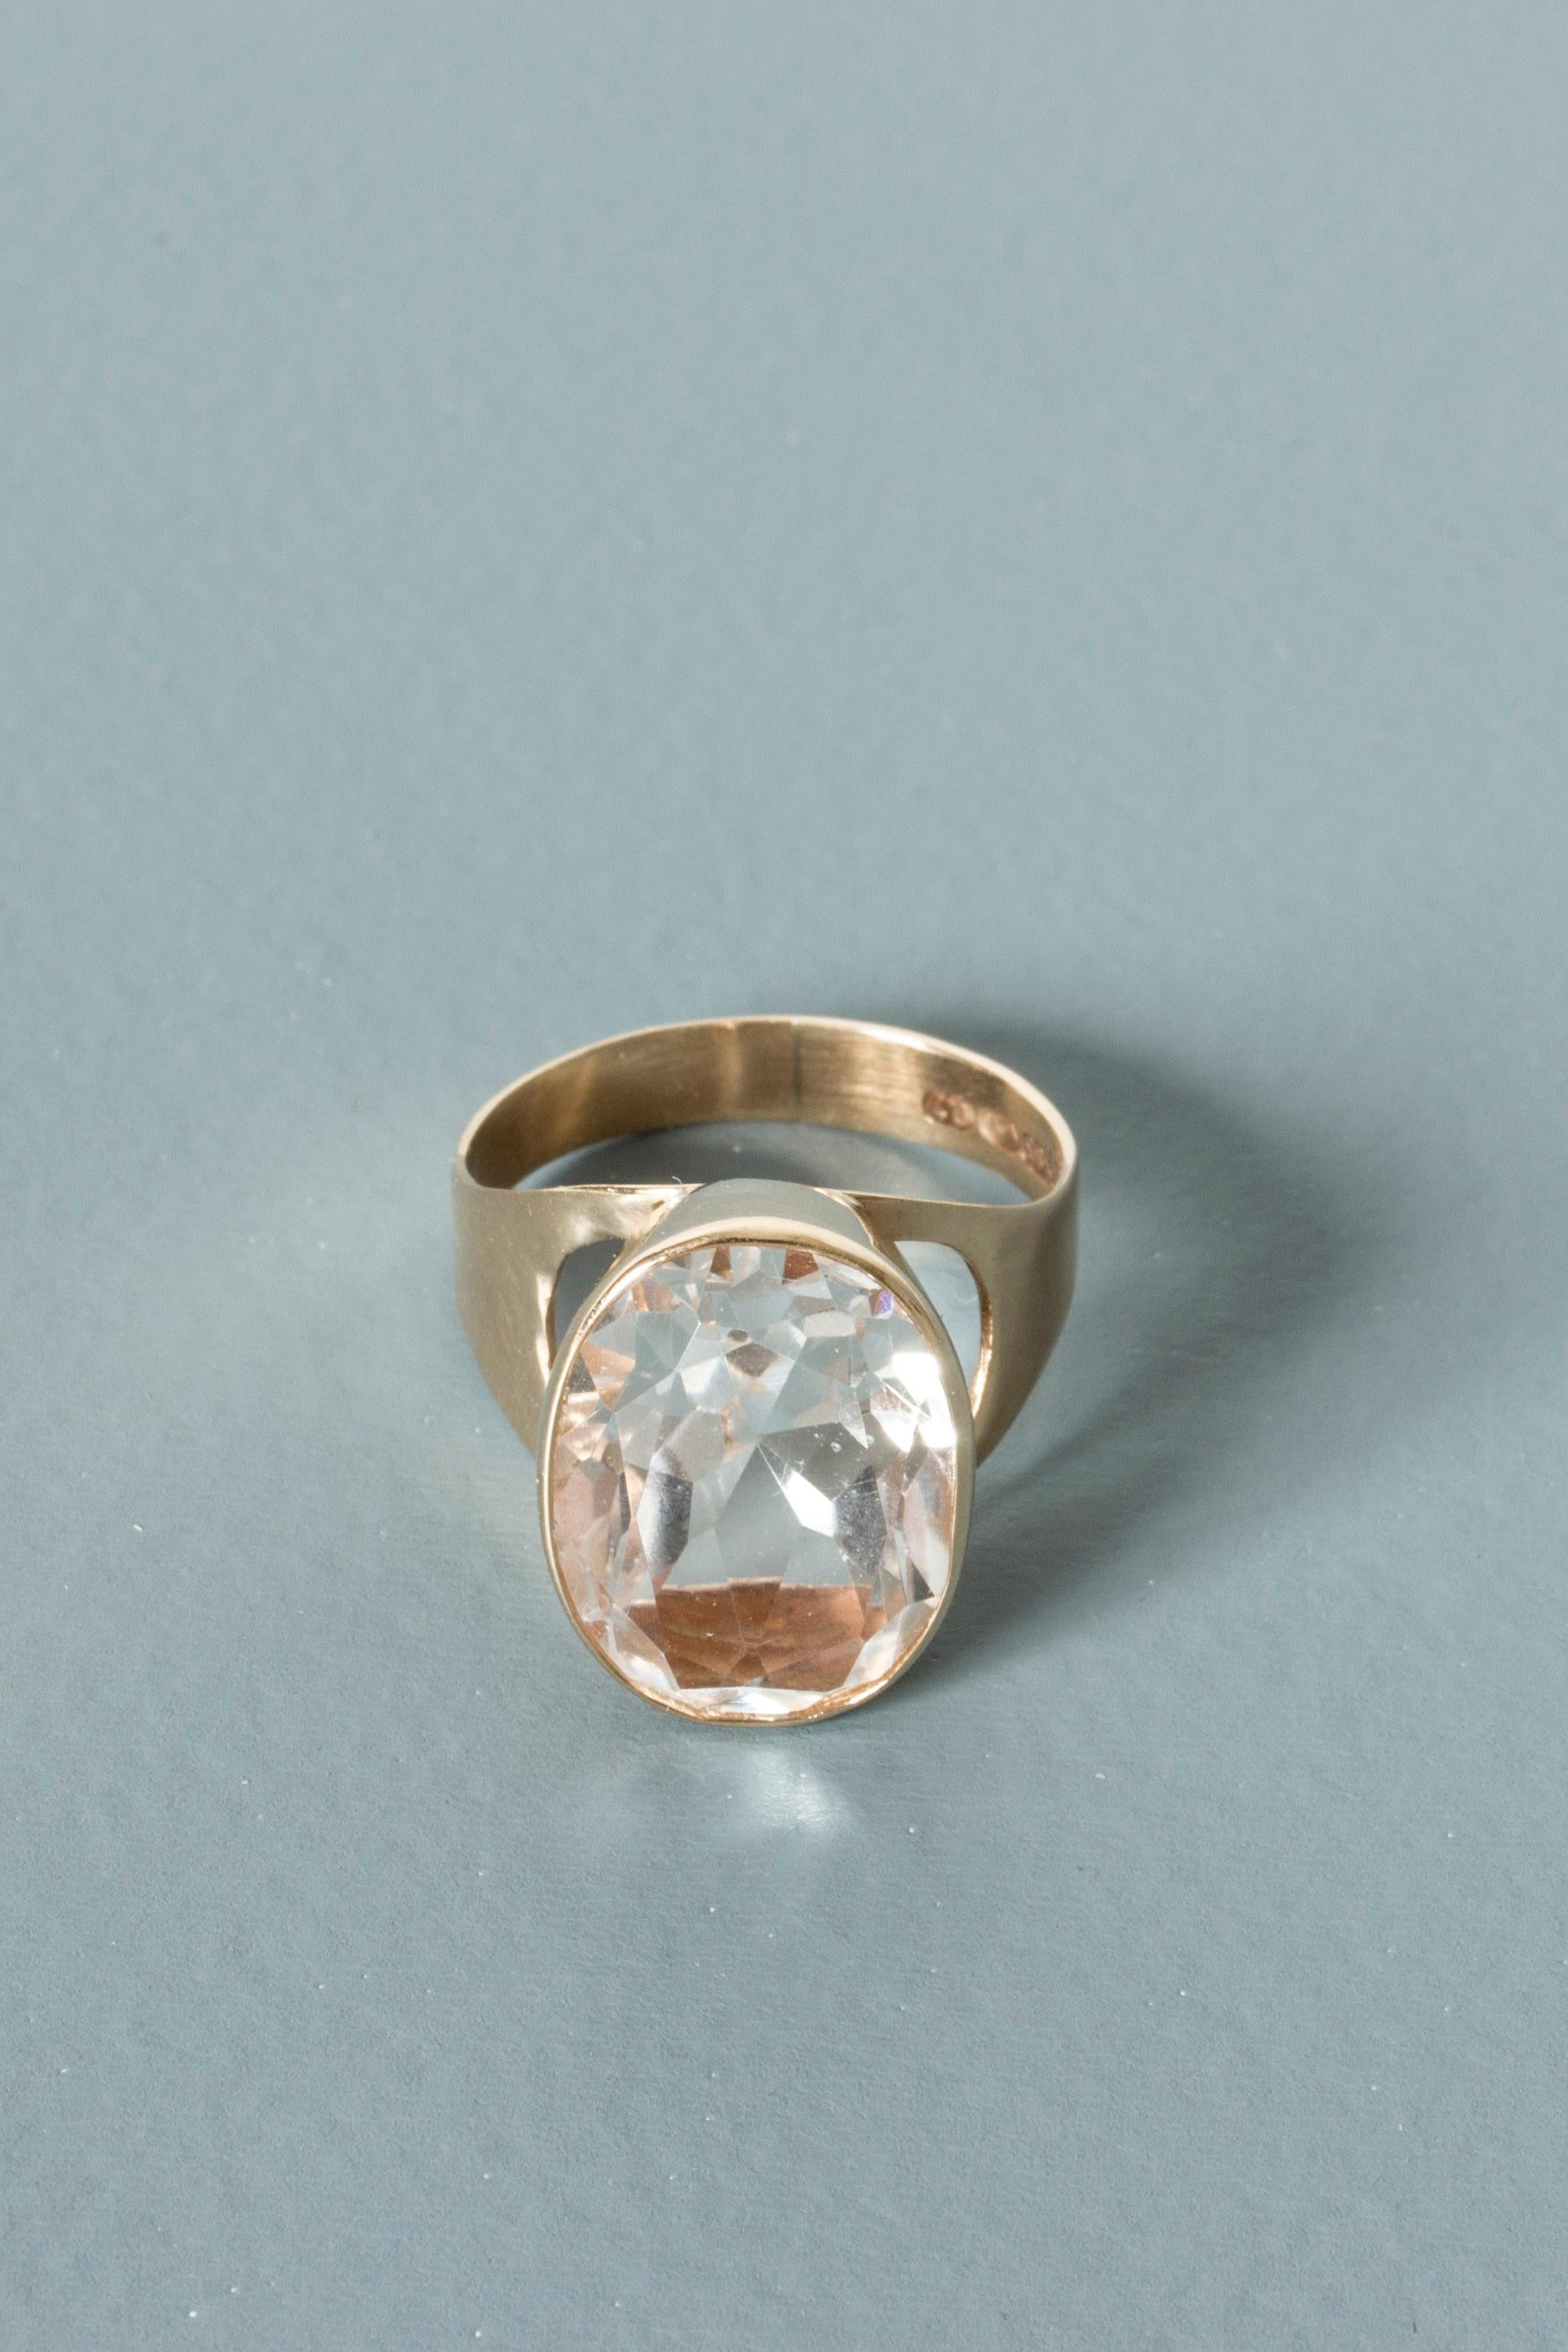 Women's or Men's Gold and Rock Crystal Ring by Tauno Shone, Finland, 1969